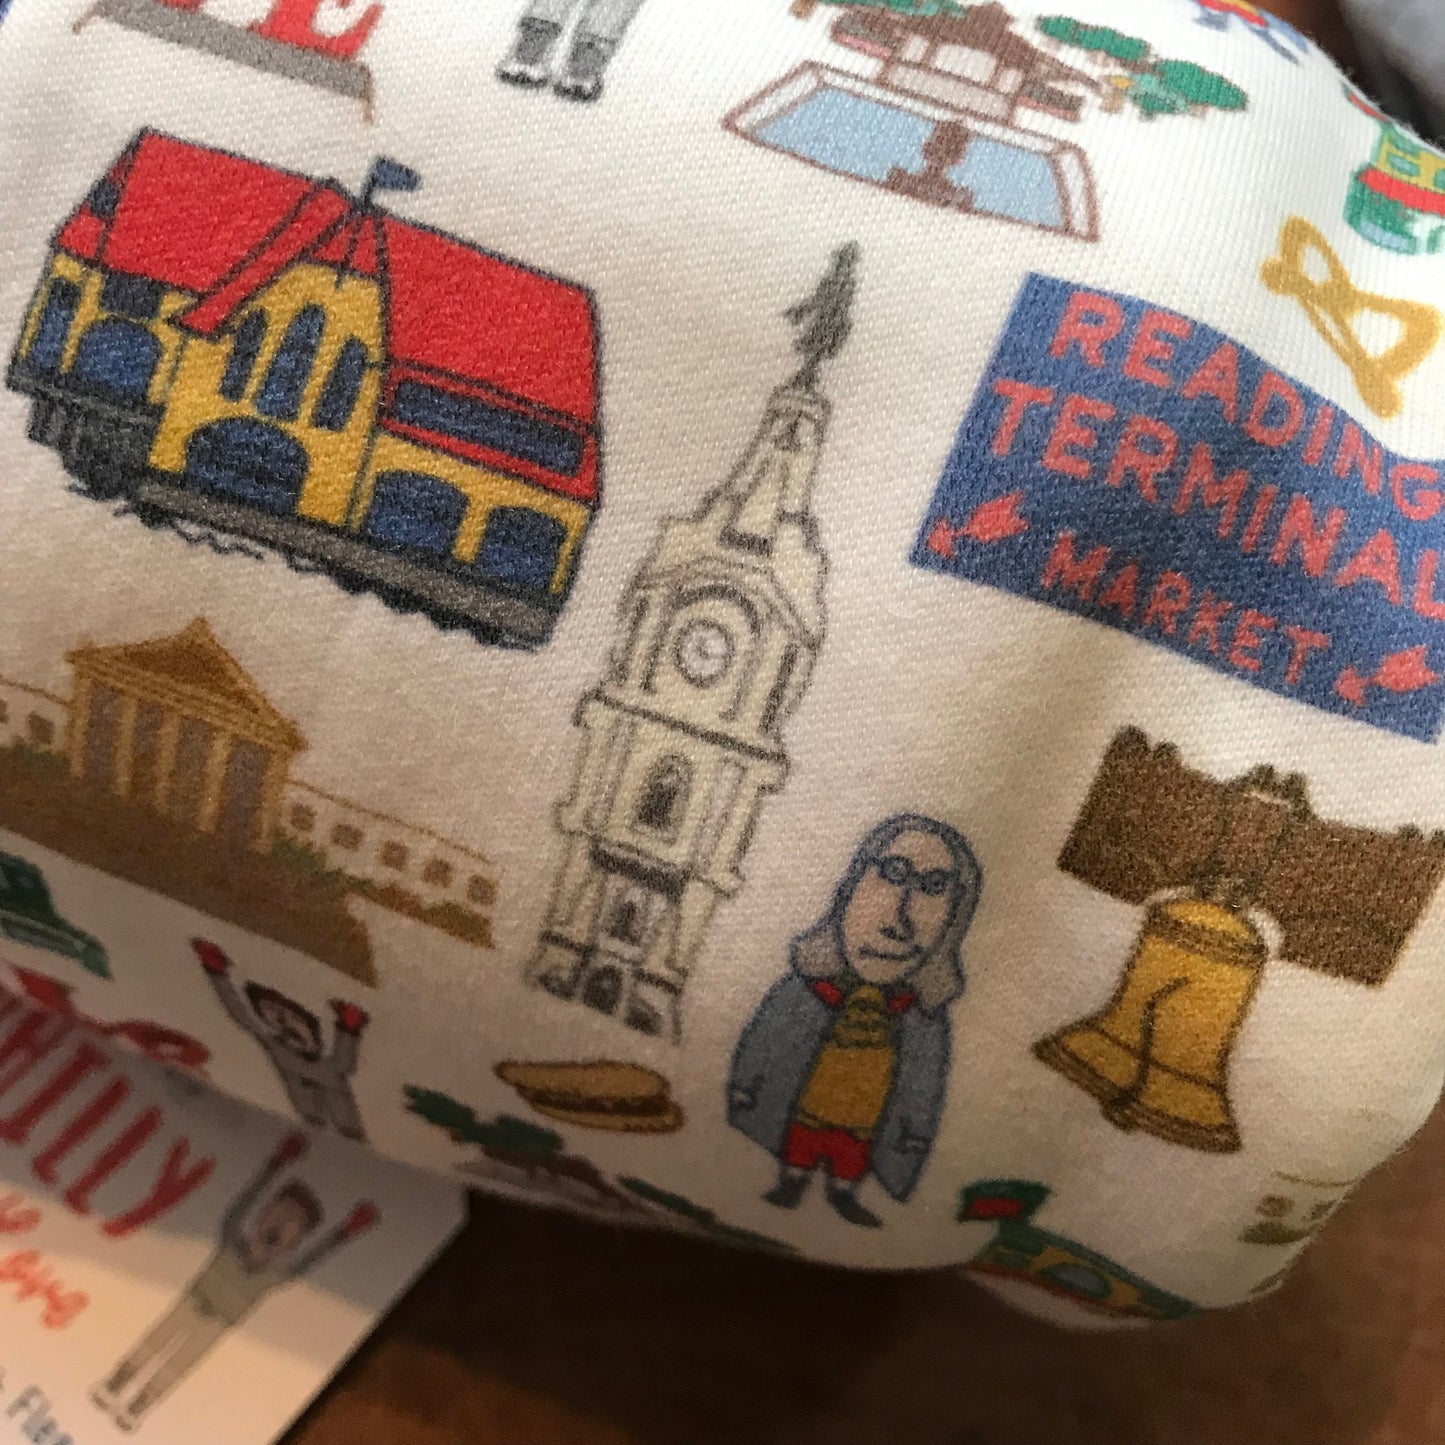 Organic cotton Philly baby blanket featuring Philadelphia landmarks and symbols designed by Ana Thorne.